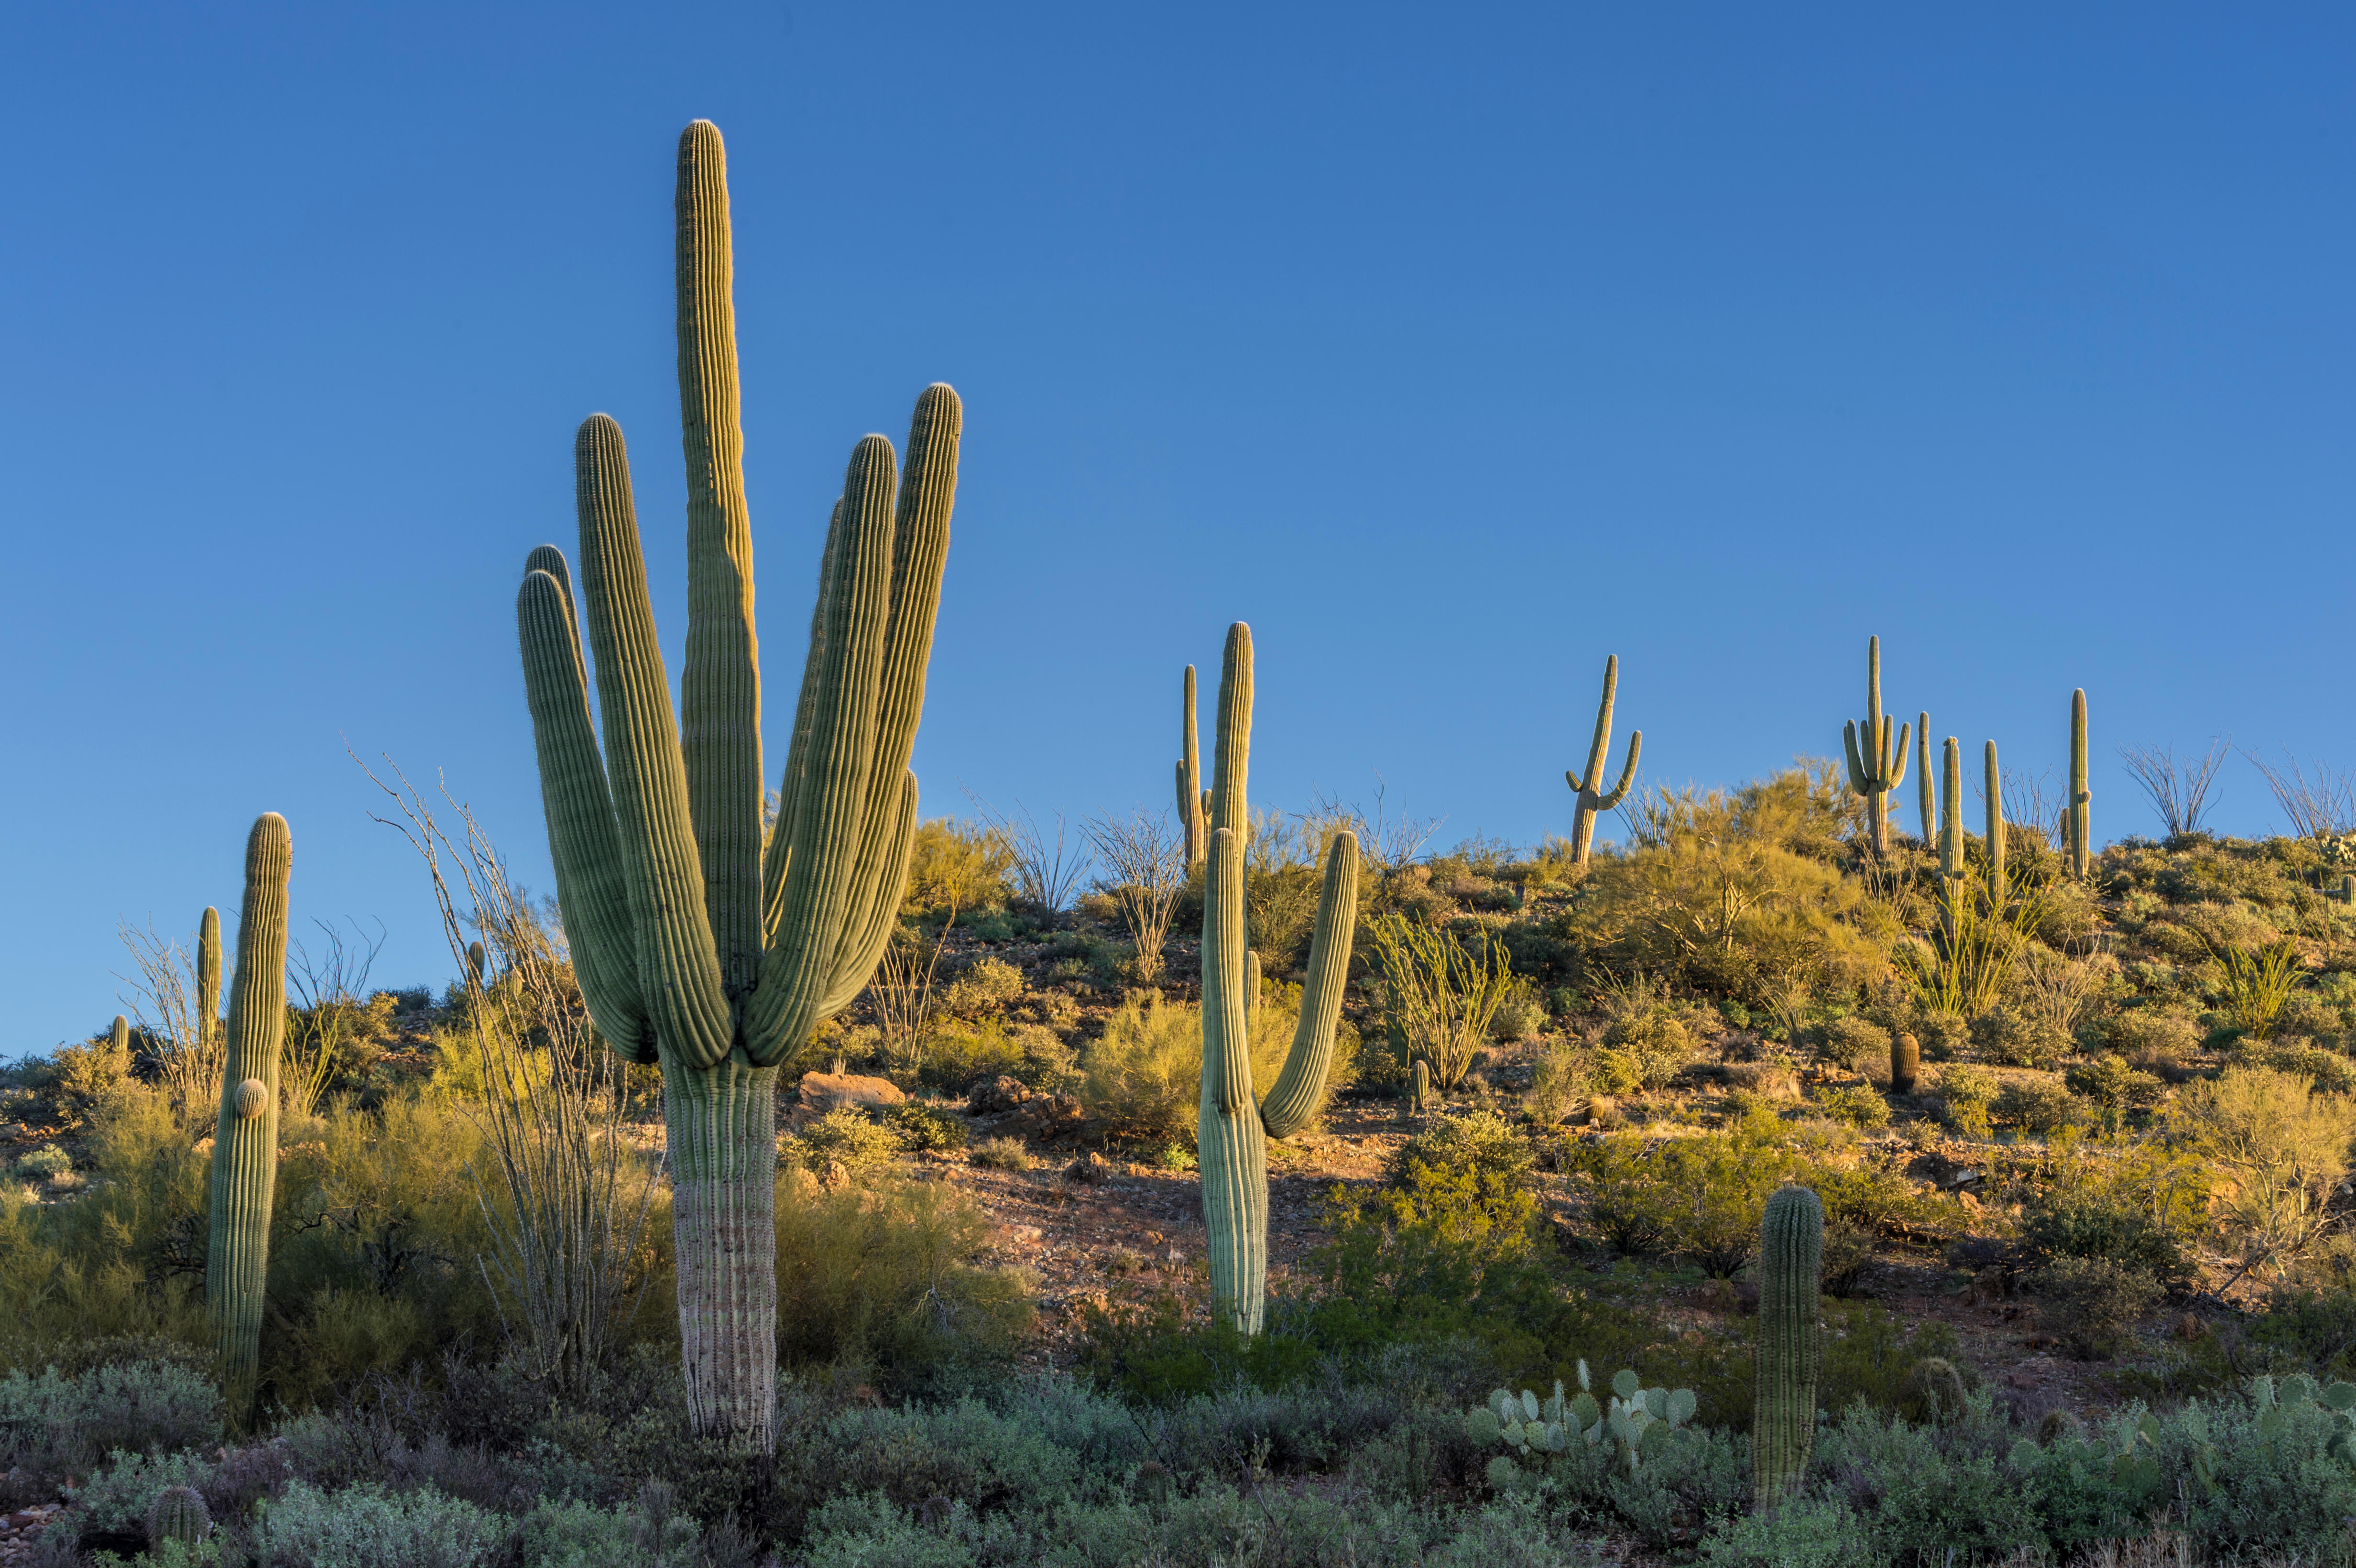 The truly unfortunate tale of the man who died after shooting a cactus